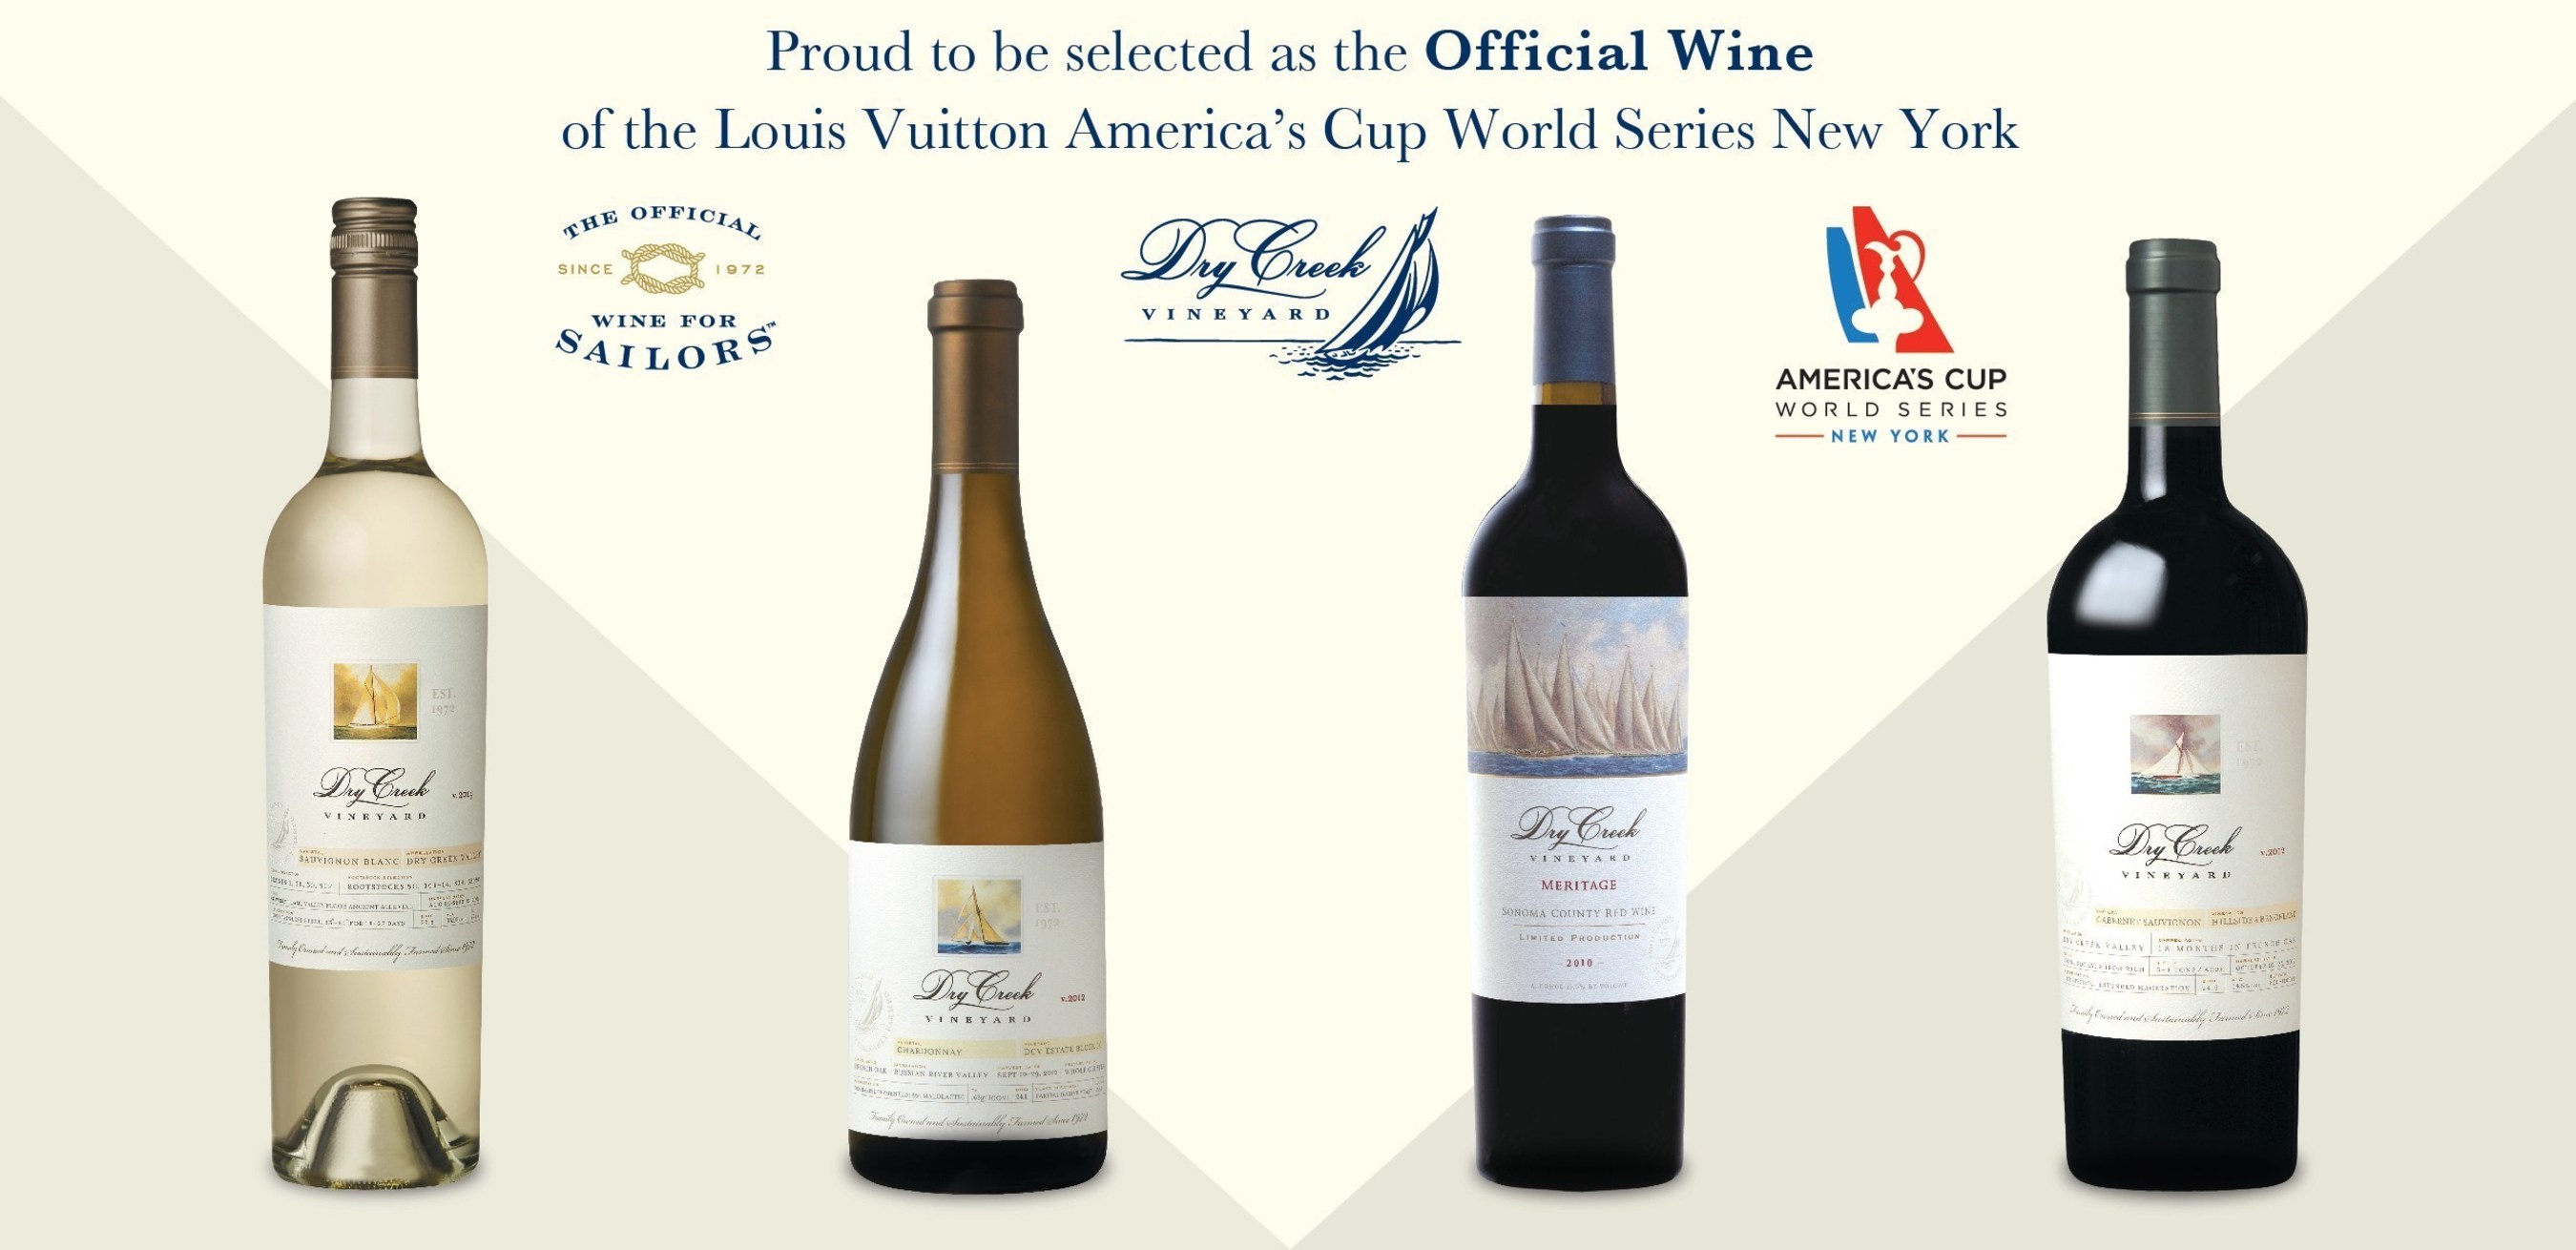 Dry Creek Vineyard is selected as the Official Wine of the Louis Vuitton America's Cup World Series New York and Chicago